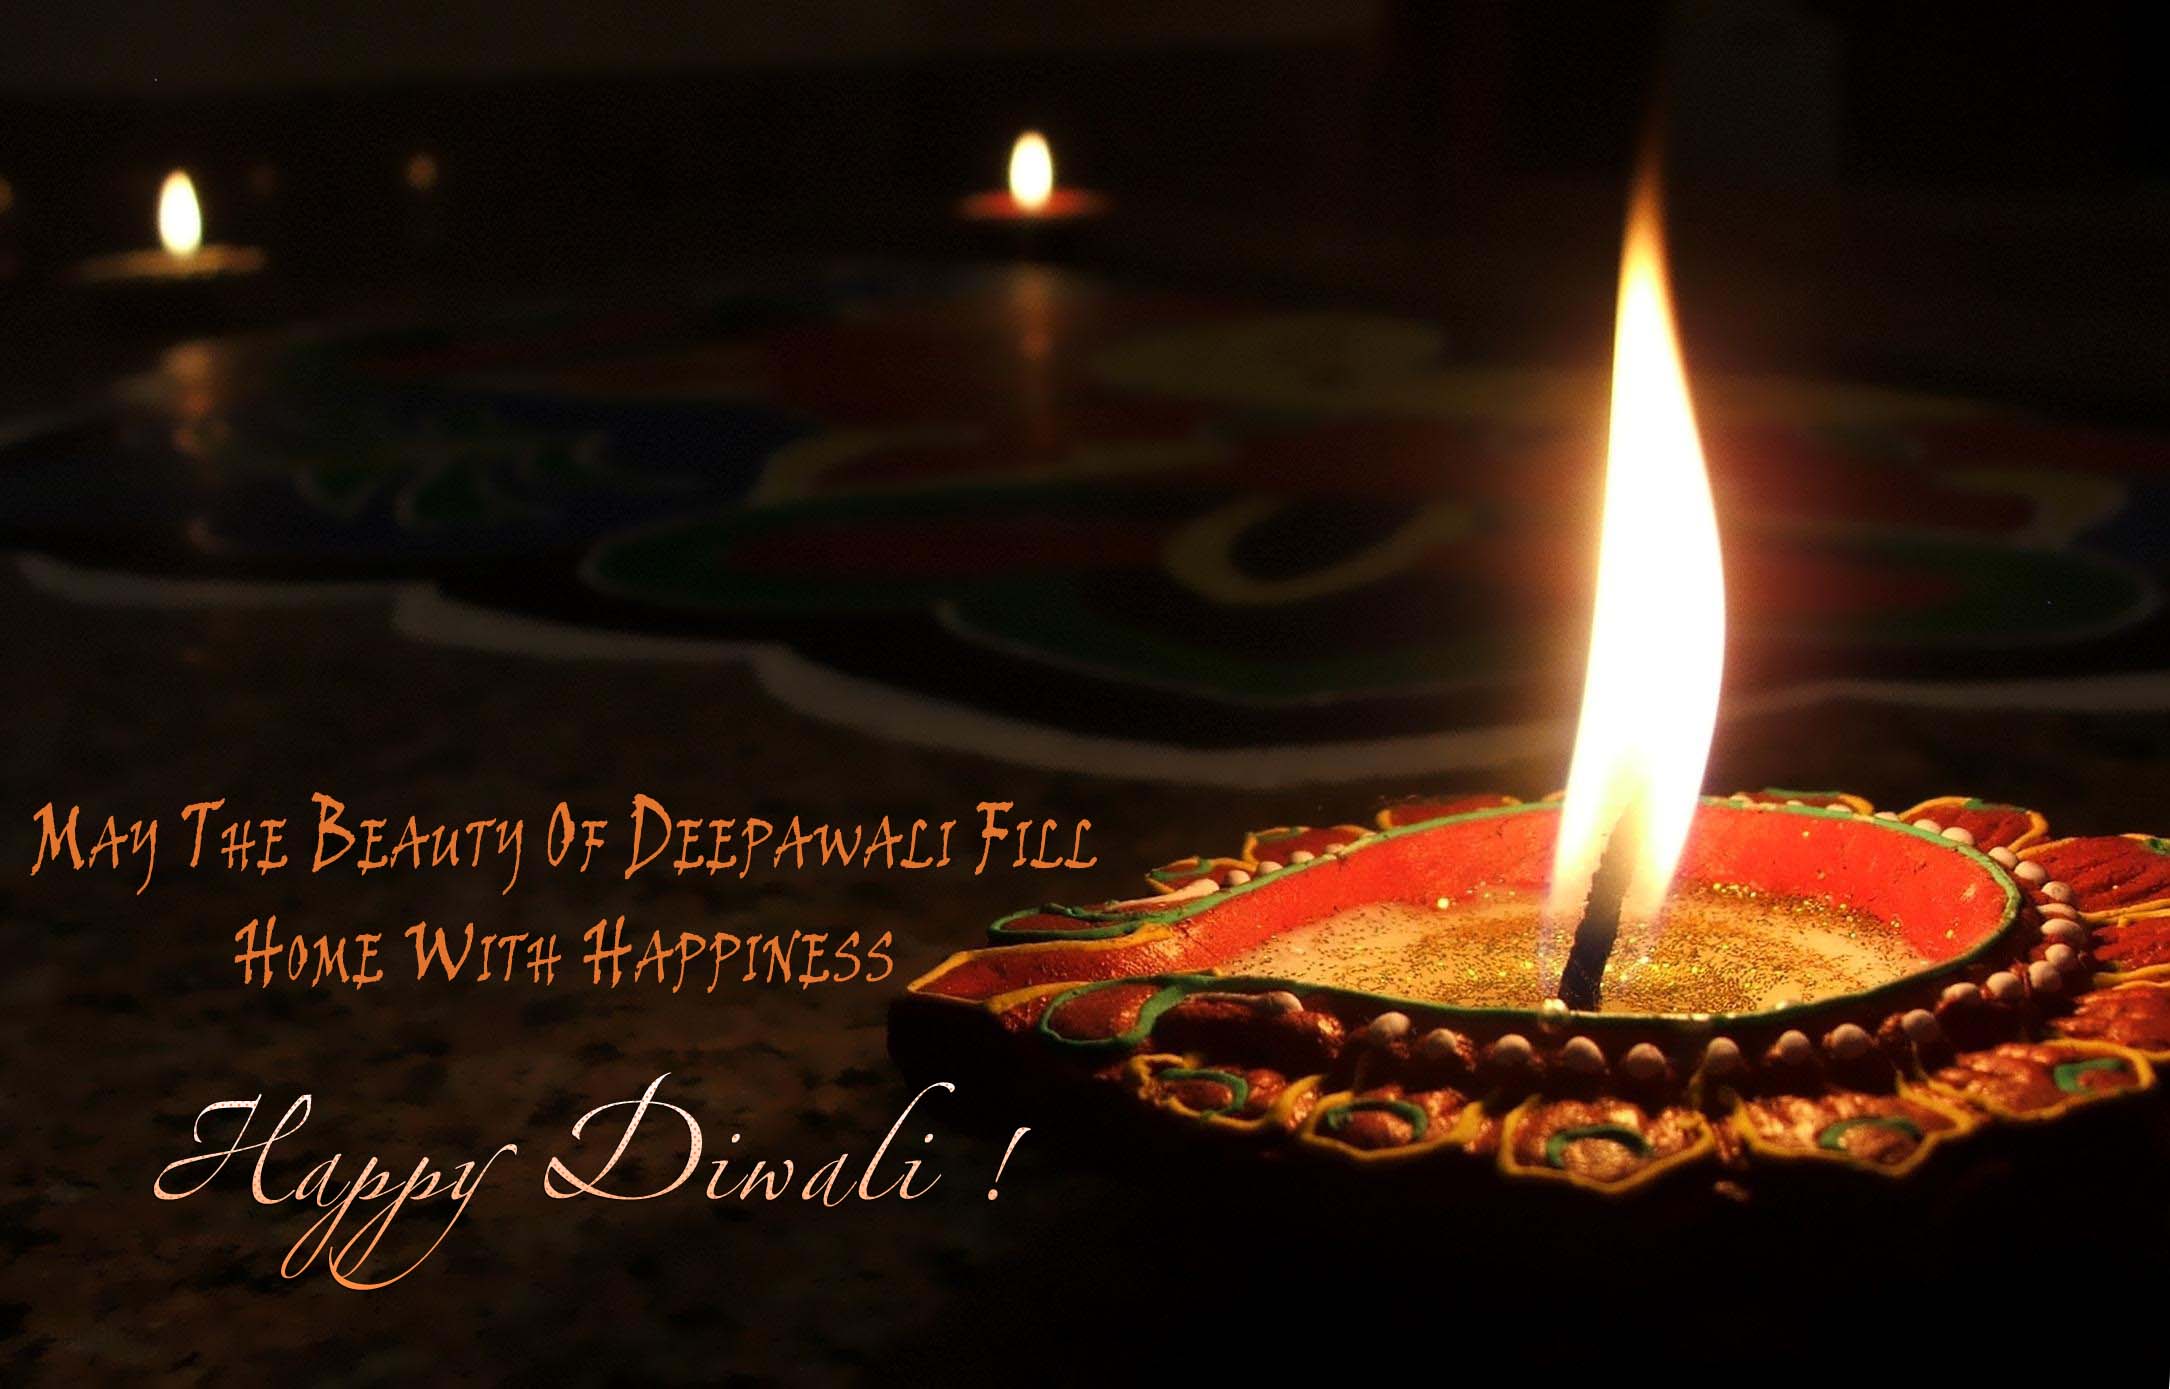 Happy Diwali Festival Greetings Free Images And Photos Download 